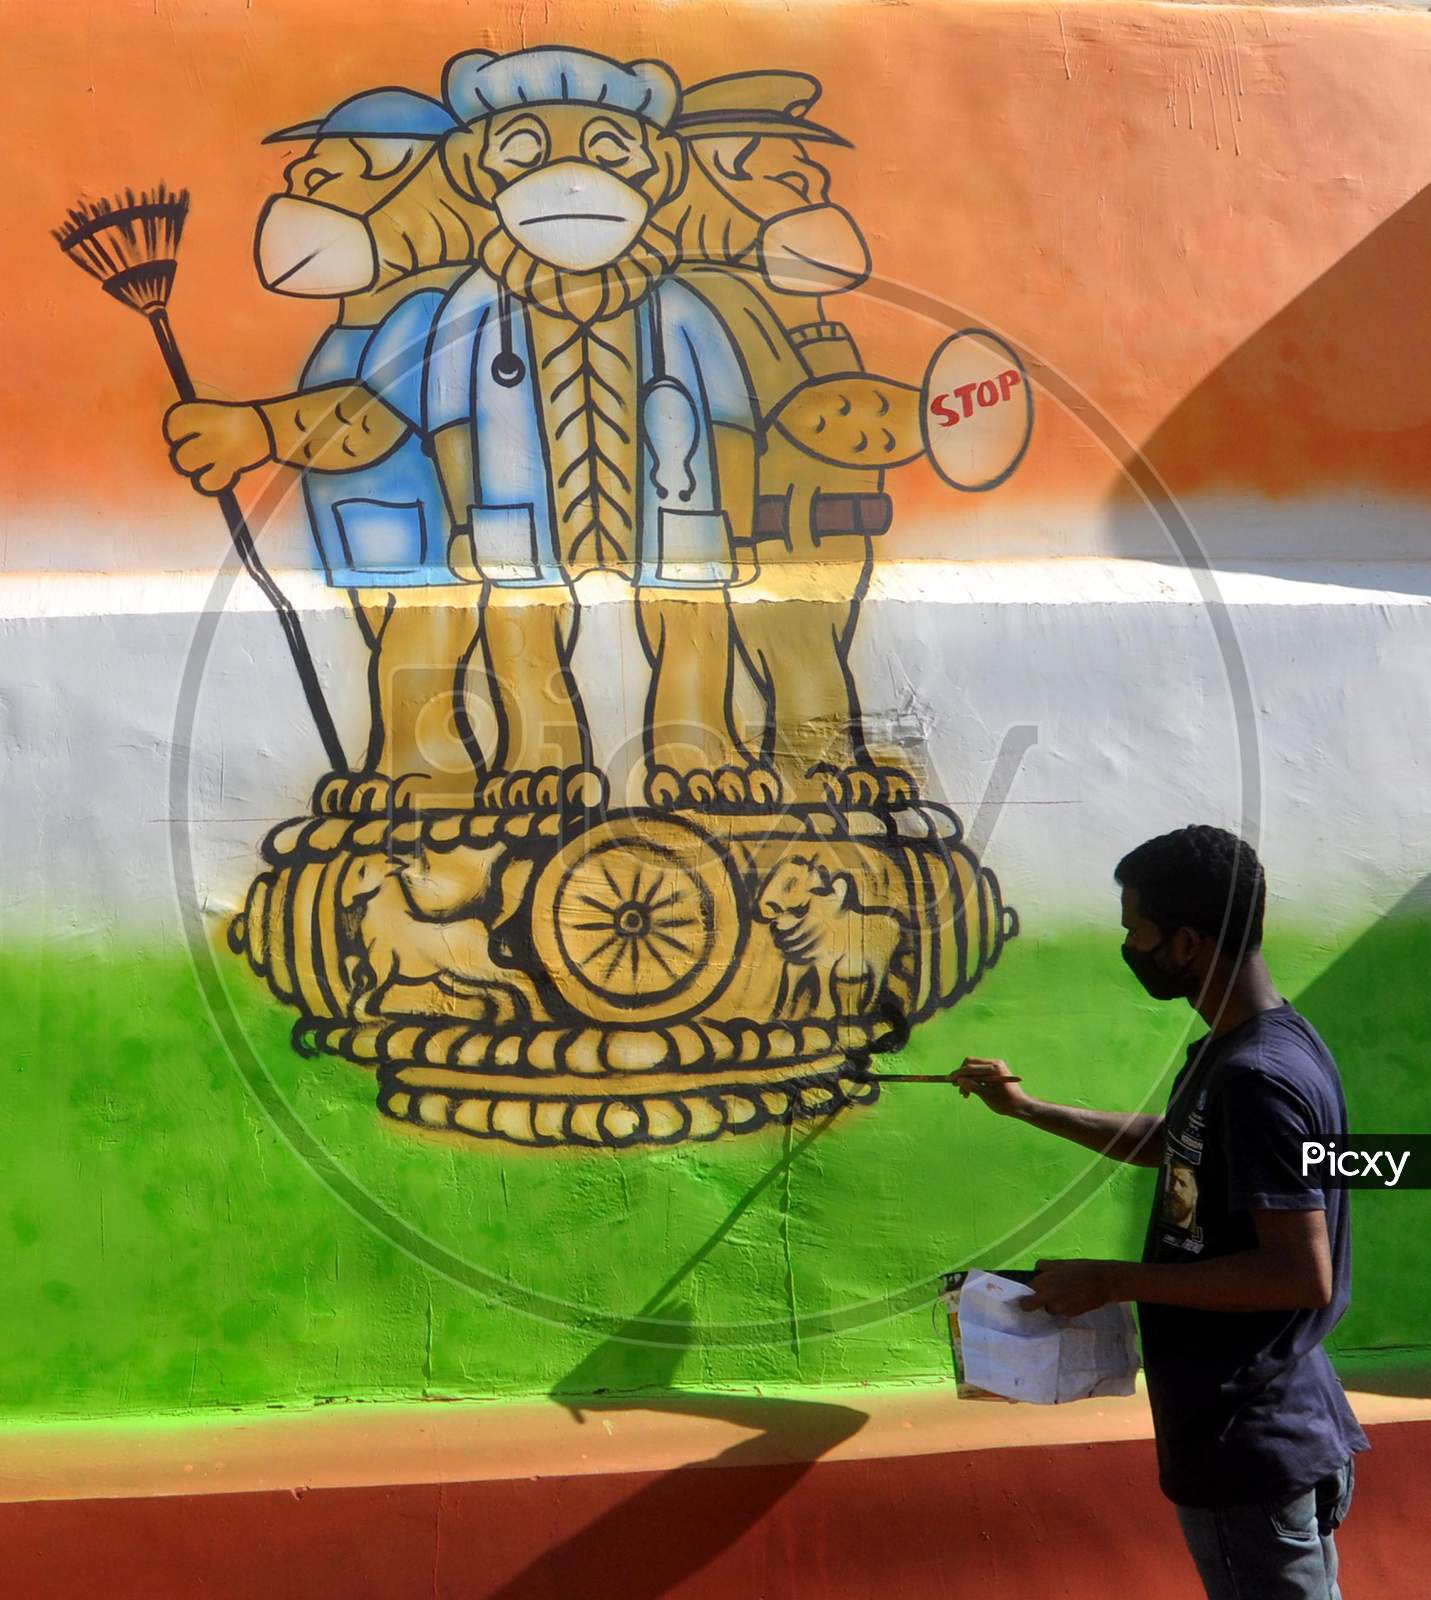 An artist Draws A  Mural On A Wall To Spread  Awareness  During Nationwide Lockdown  Amidst Coronavirus Or COVID-19 Pandemic  In Guwahati, Wednesday, May 6, 2020.onavirus Or COVID-19 Pandemic  In Guwahati, Wednesday, May 6, 2020.